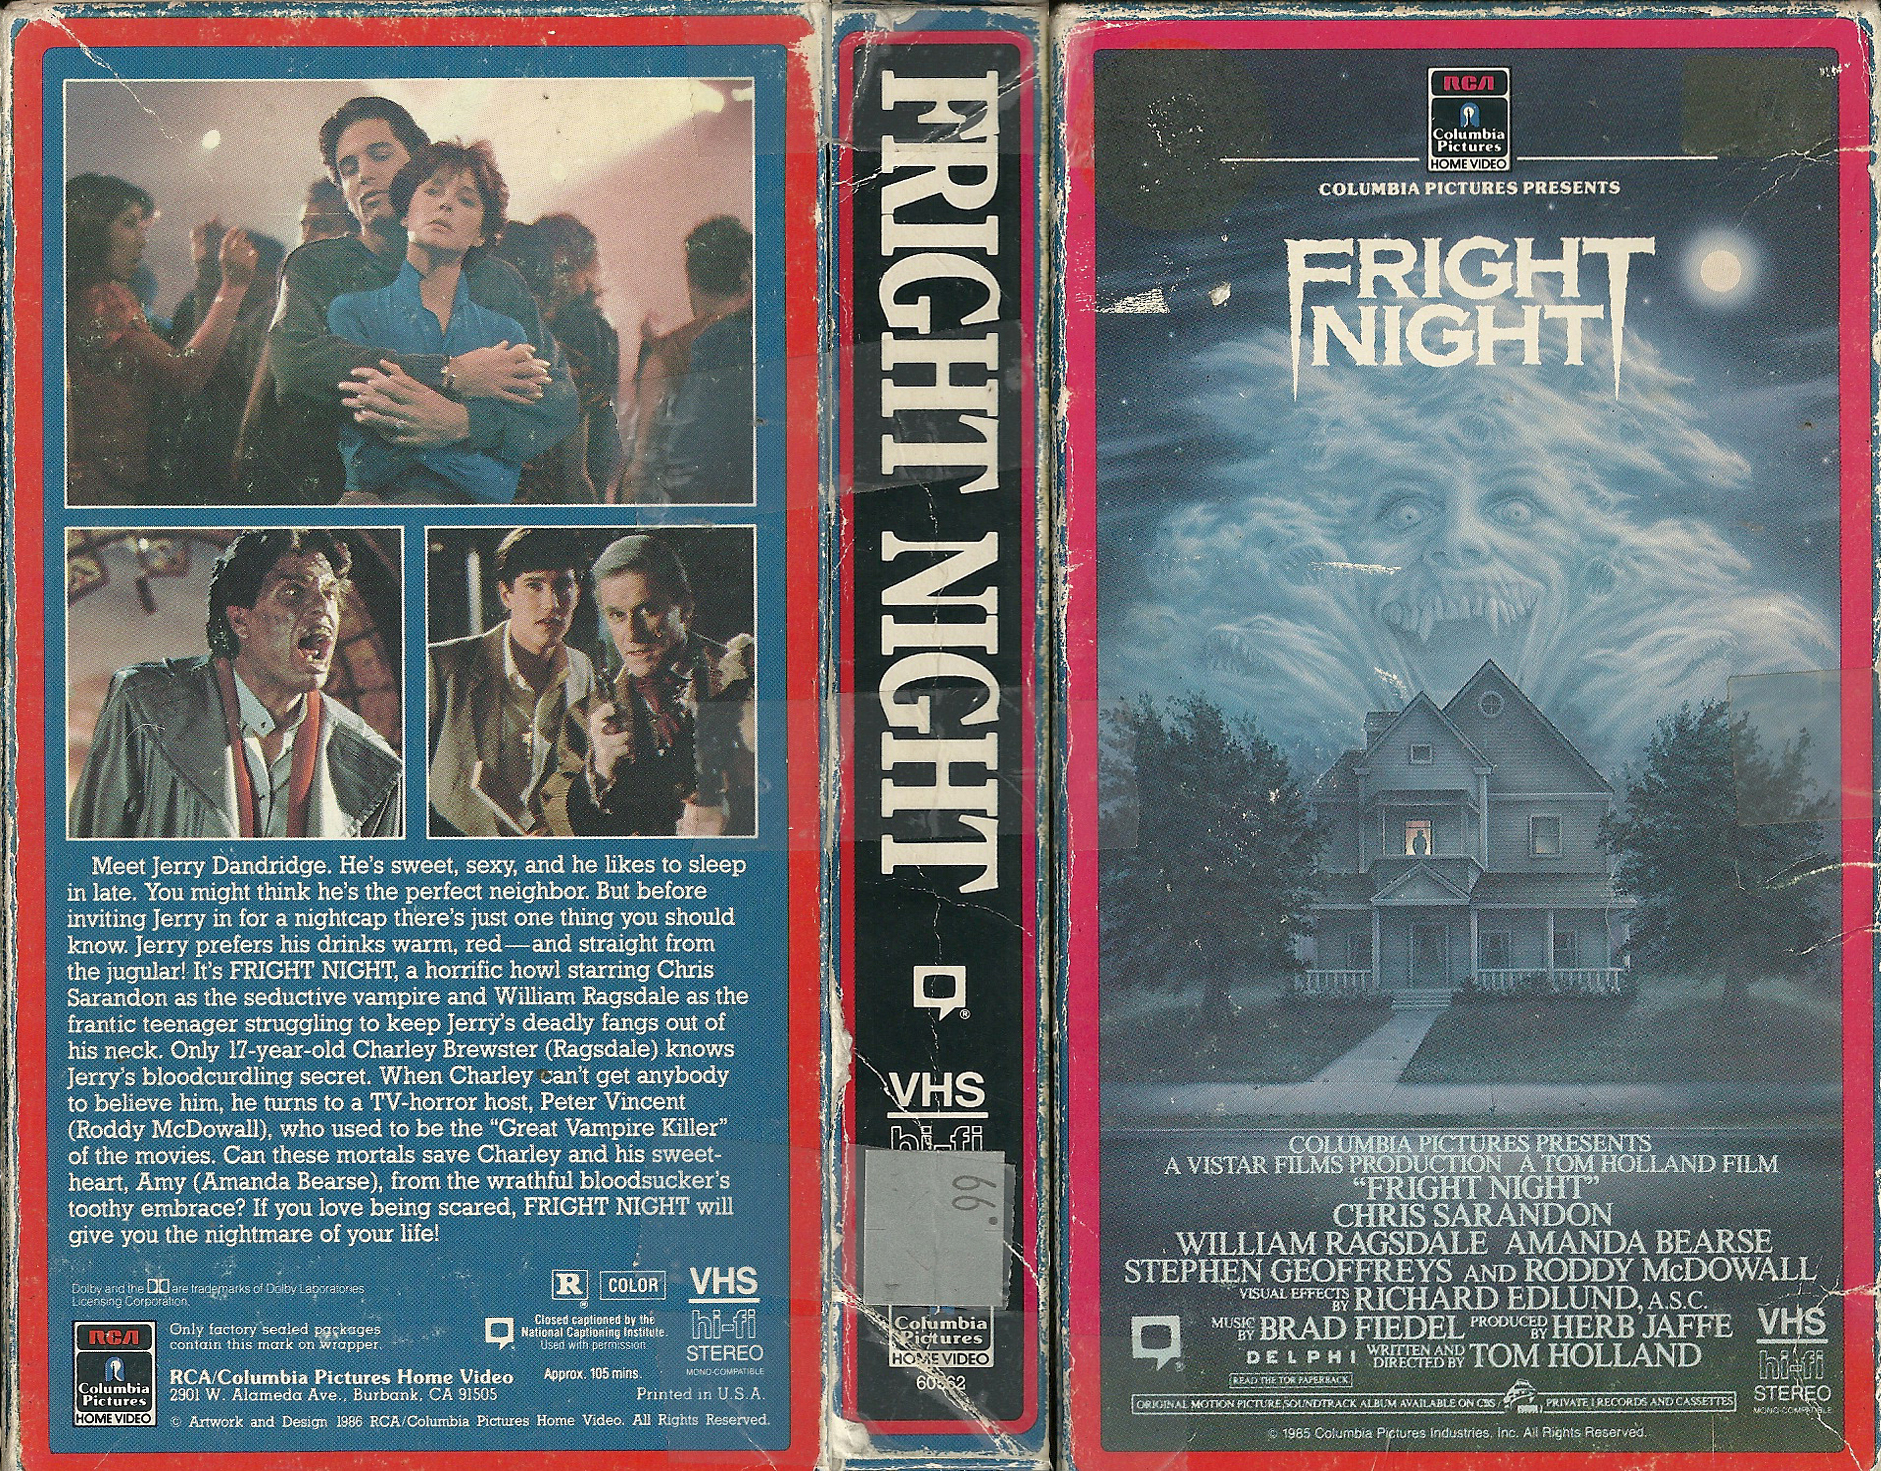 September 13 2011 VHS cover scan - click for high res version fright night.